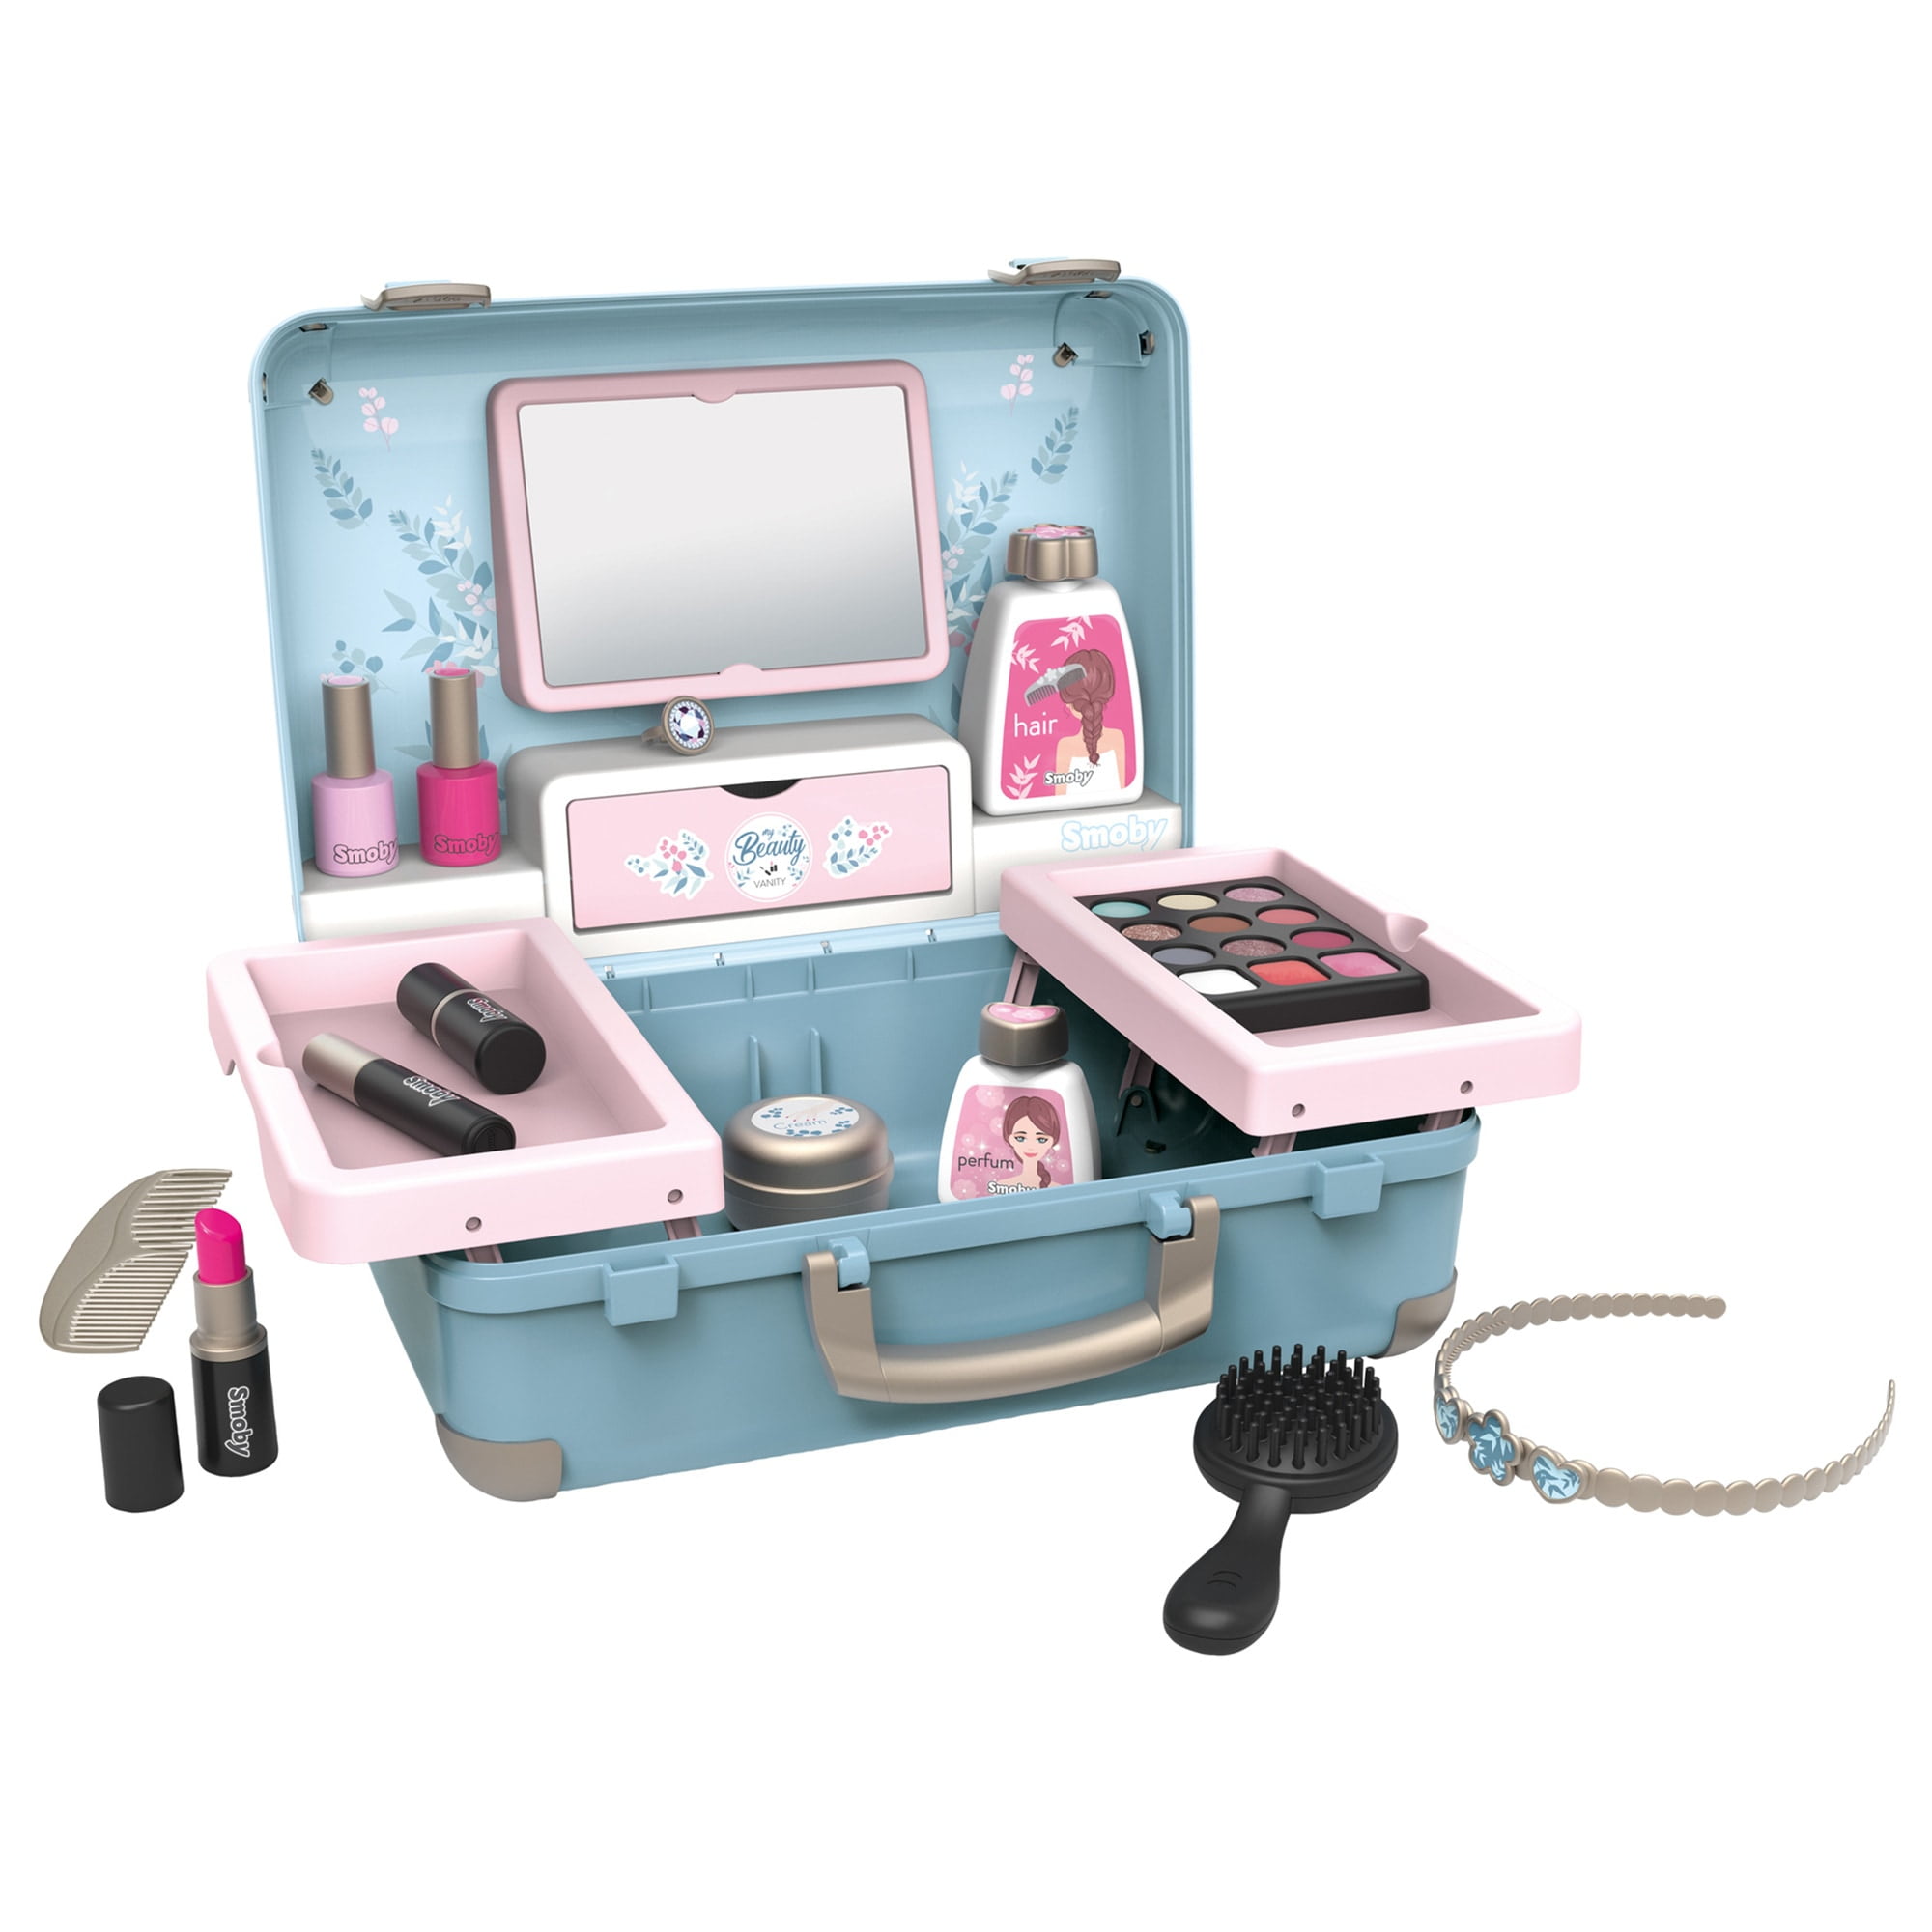 Smoby - My Beauty Vanity: Carry Case - 13 Accessory Portable Case